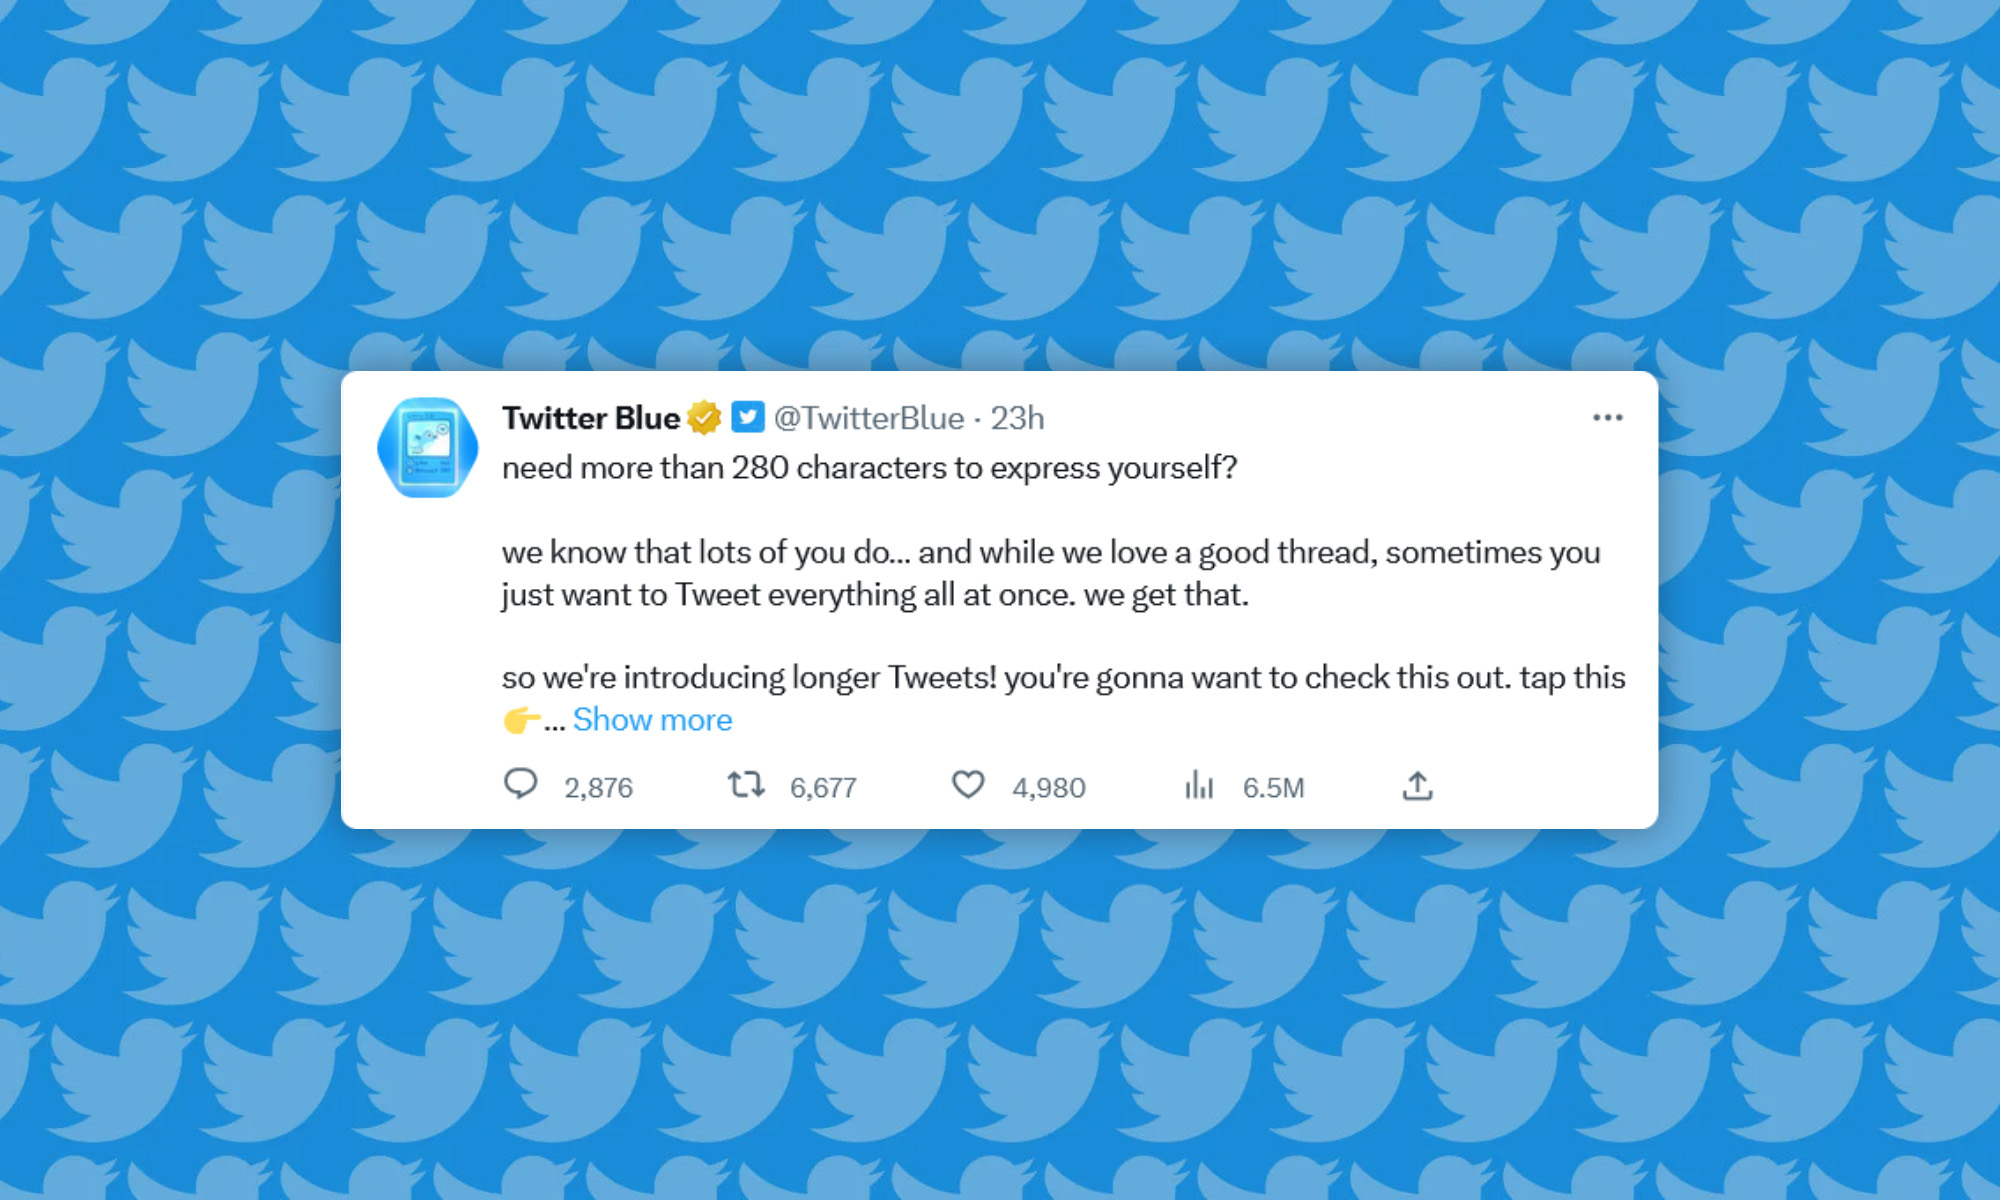 twitter blue subscribers can now make 4000-character tweets